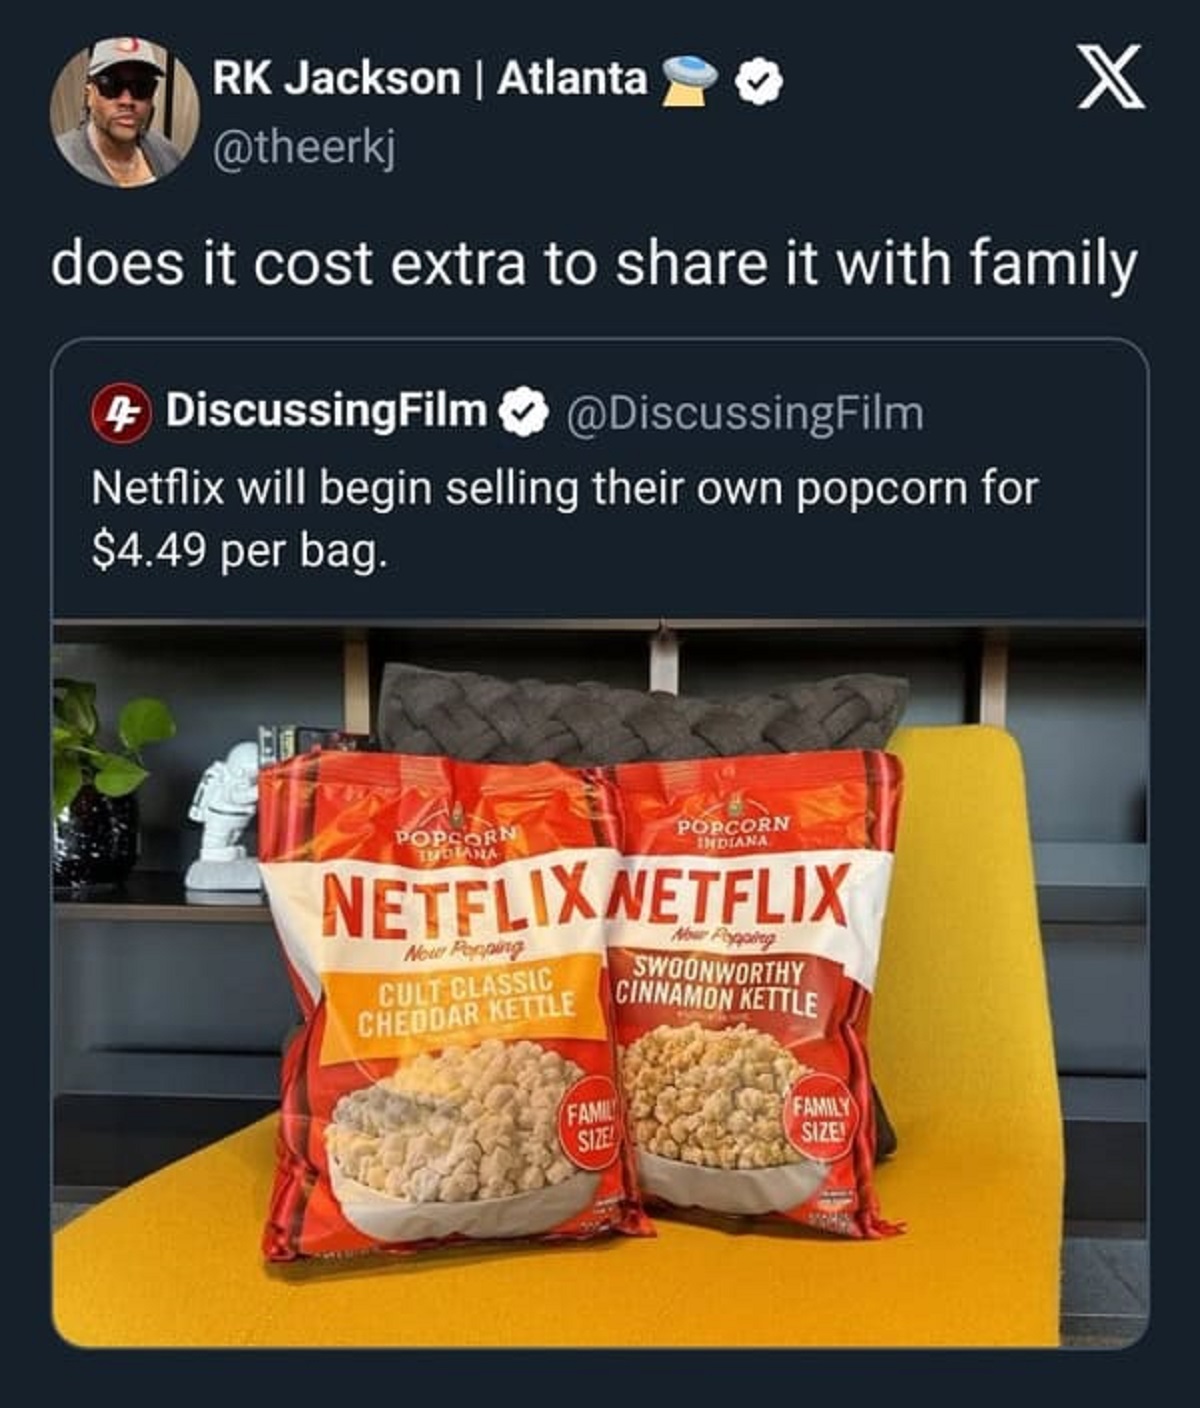 netflix new popcorn - Rk Jackson | Atlanta X does it cost extra to it with family 4 DiscussingFilm Netflix will begin selling their own popcorn for $4.49 per bag. Popcorn Tudtana Popcorn Indiana Netflixnetflix New Pepping Cult Classic Cheddar Kettle Famil